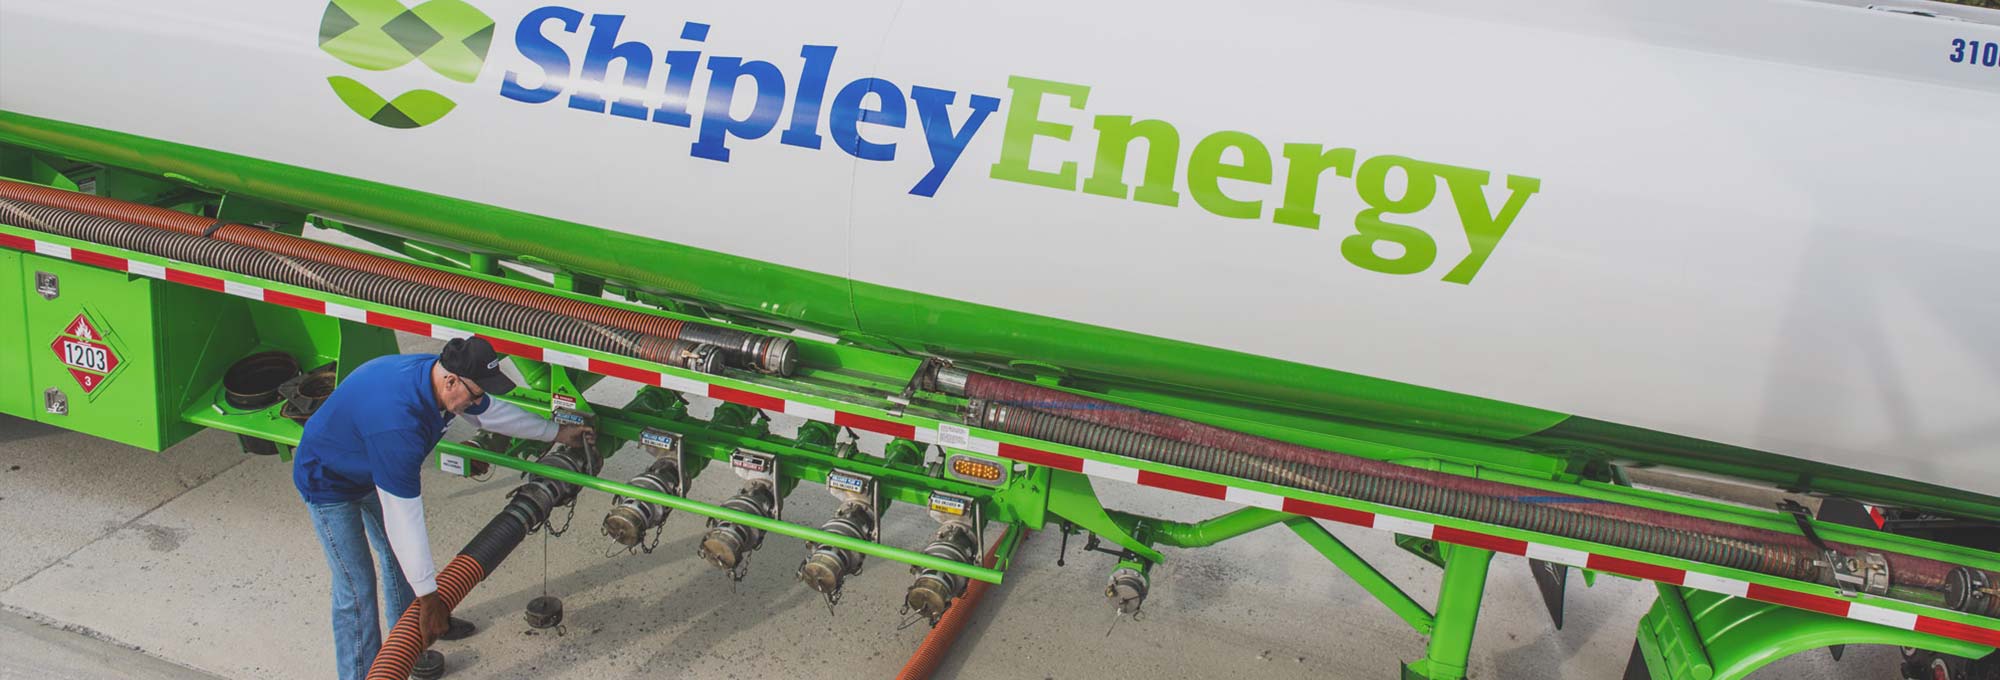 Stay Warm All Year With Shipley Energy